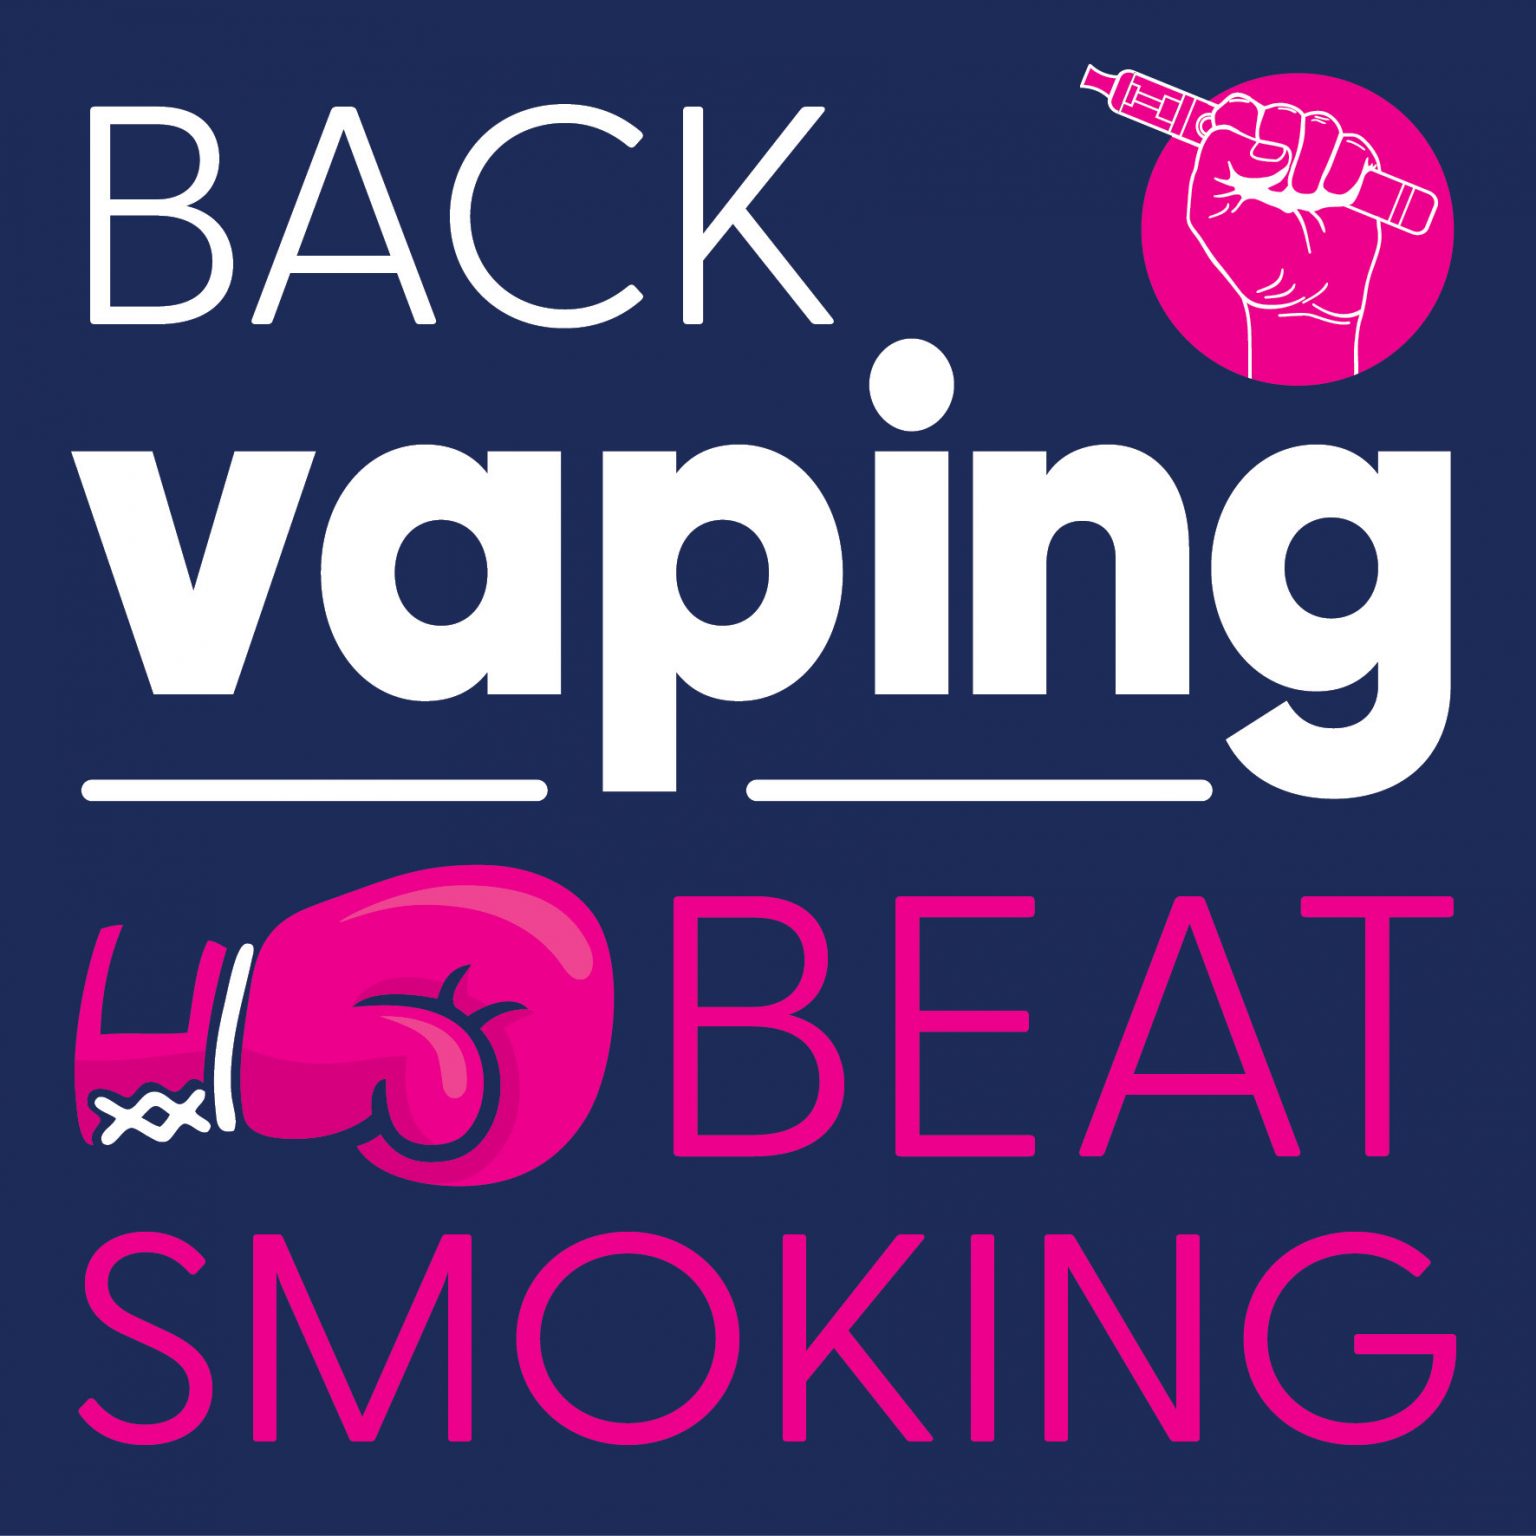 Back Vaping Beat Cancer - Petition